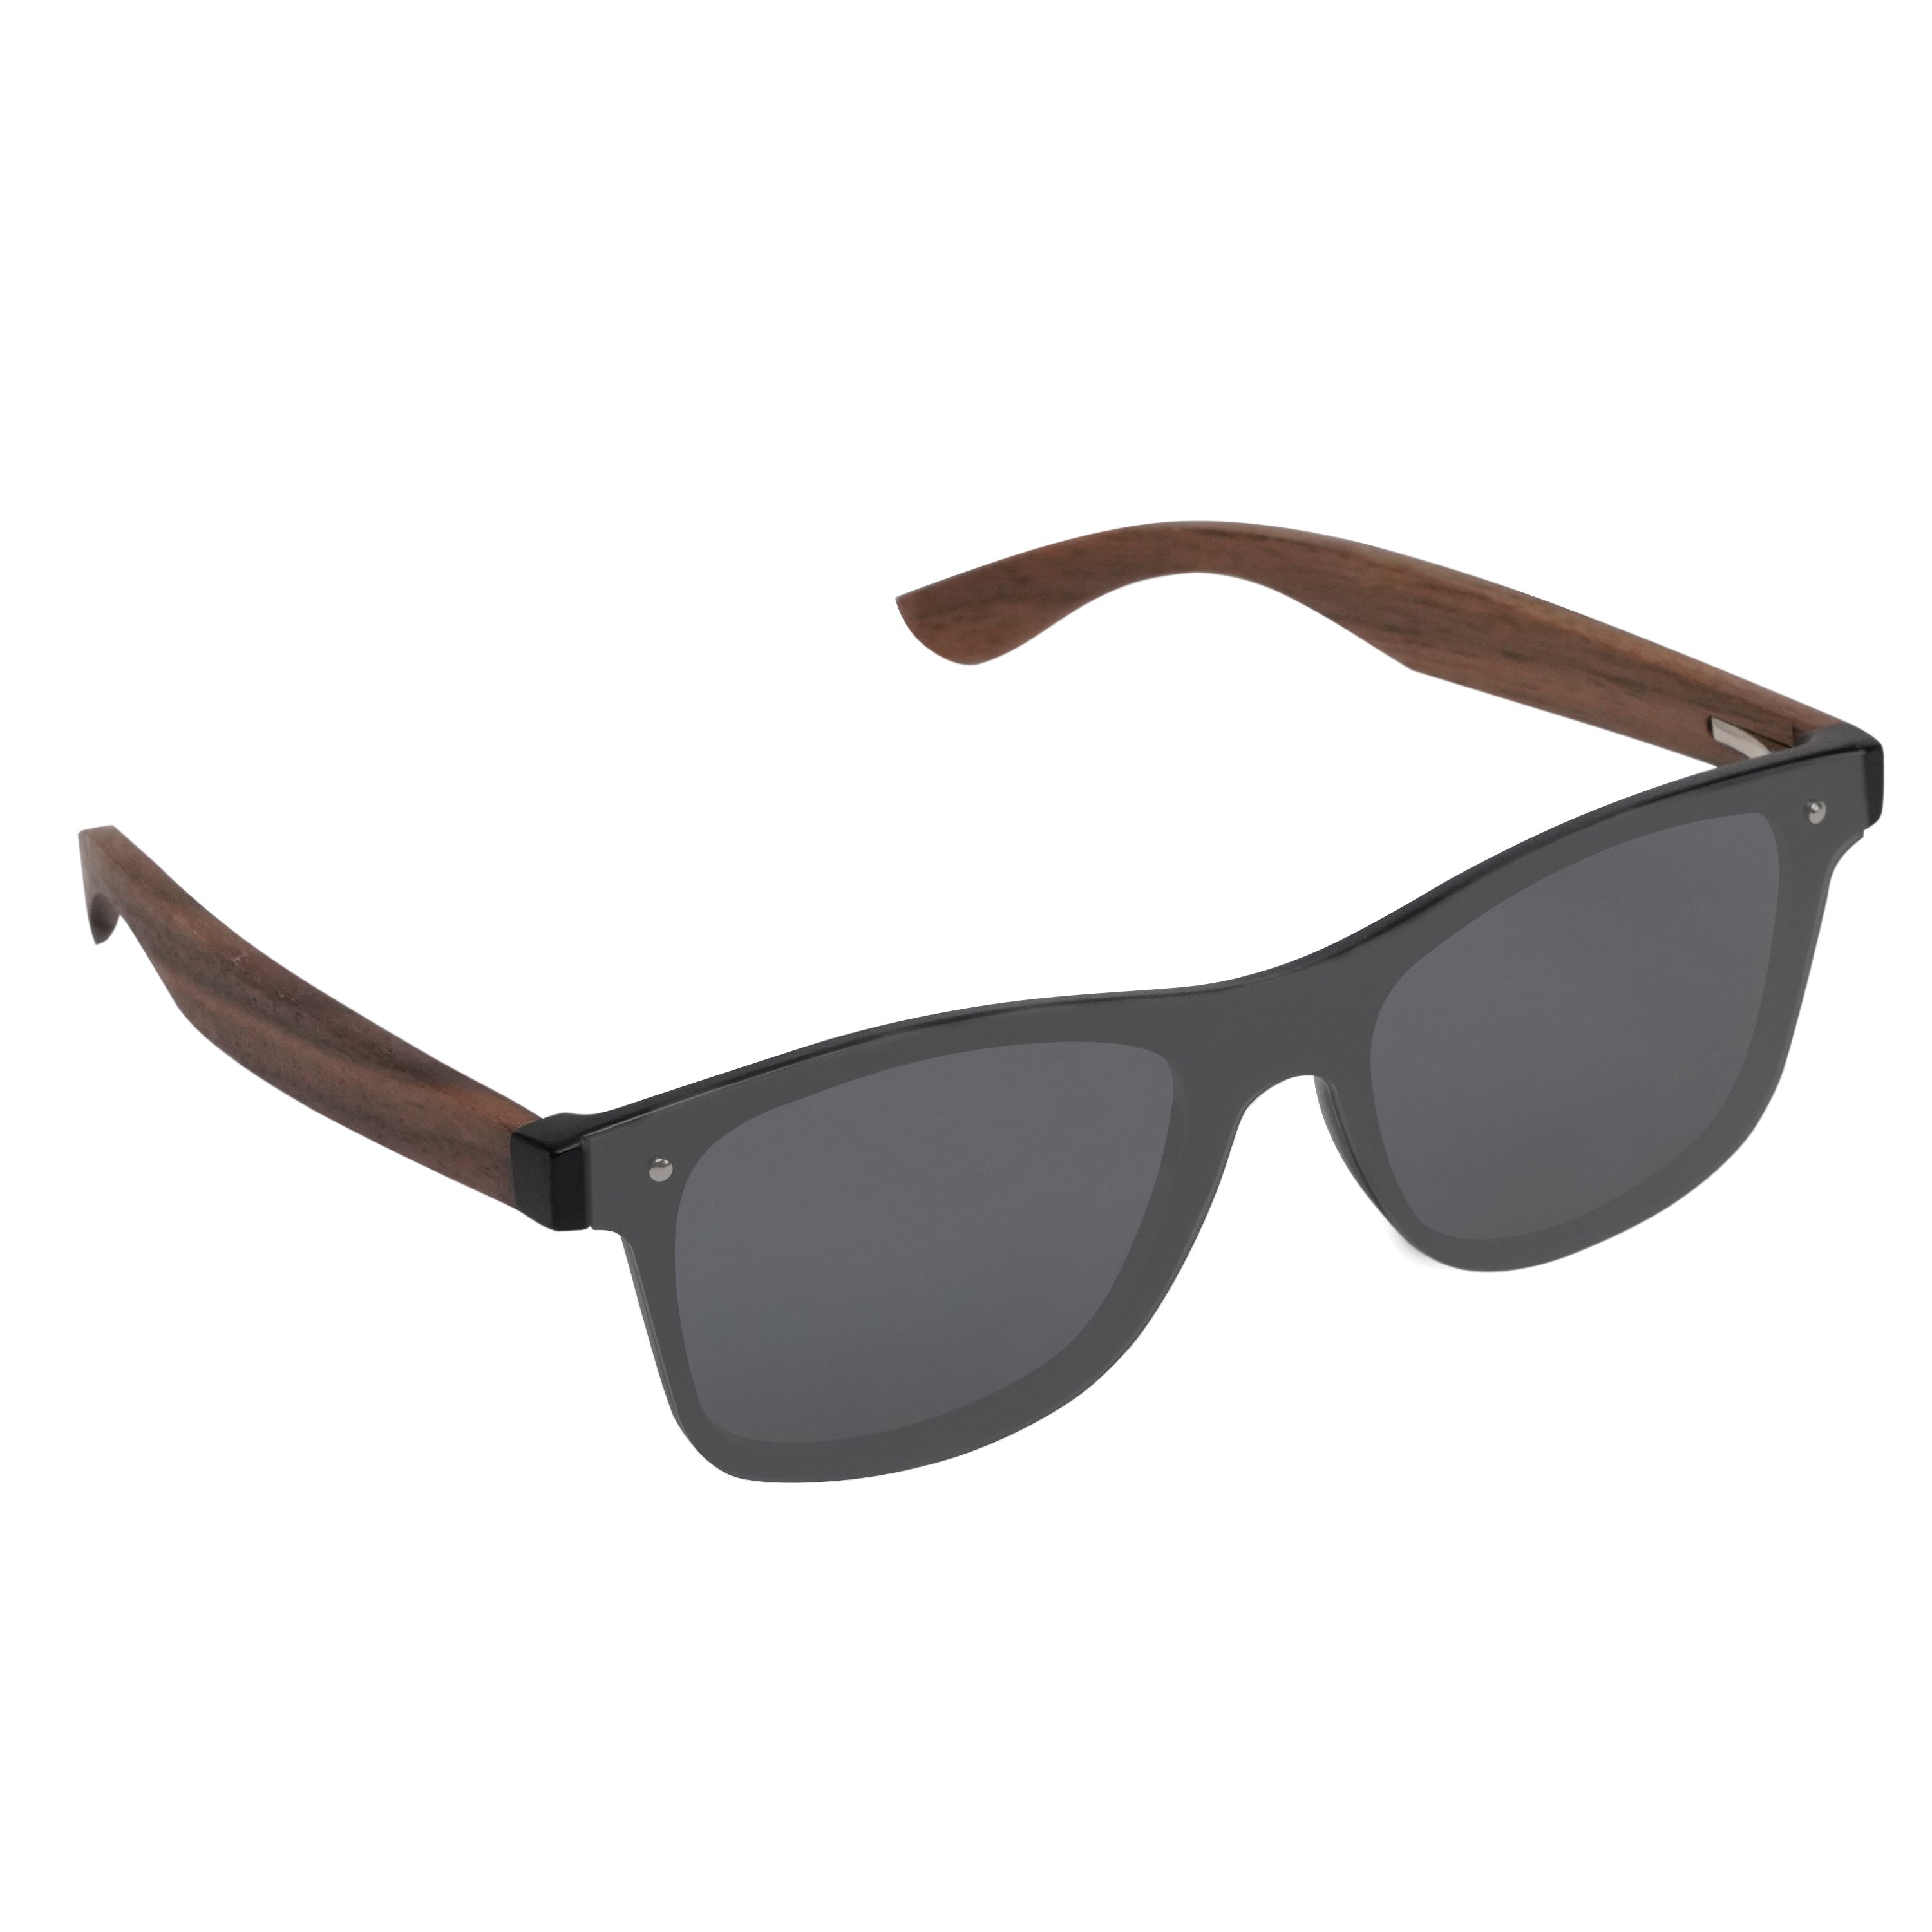 XXL Mens Extra Large Wooden Classic Polarized Sunglasses for Big